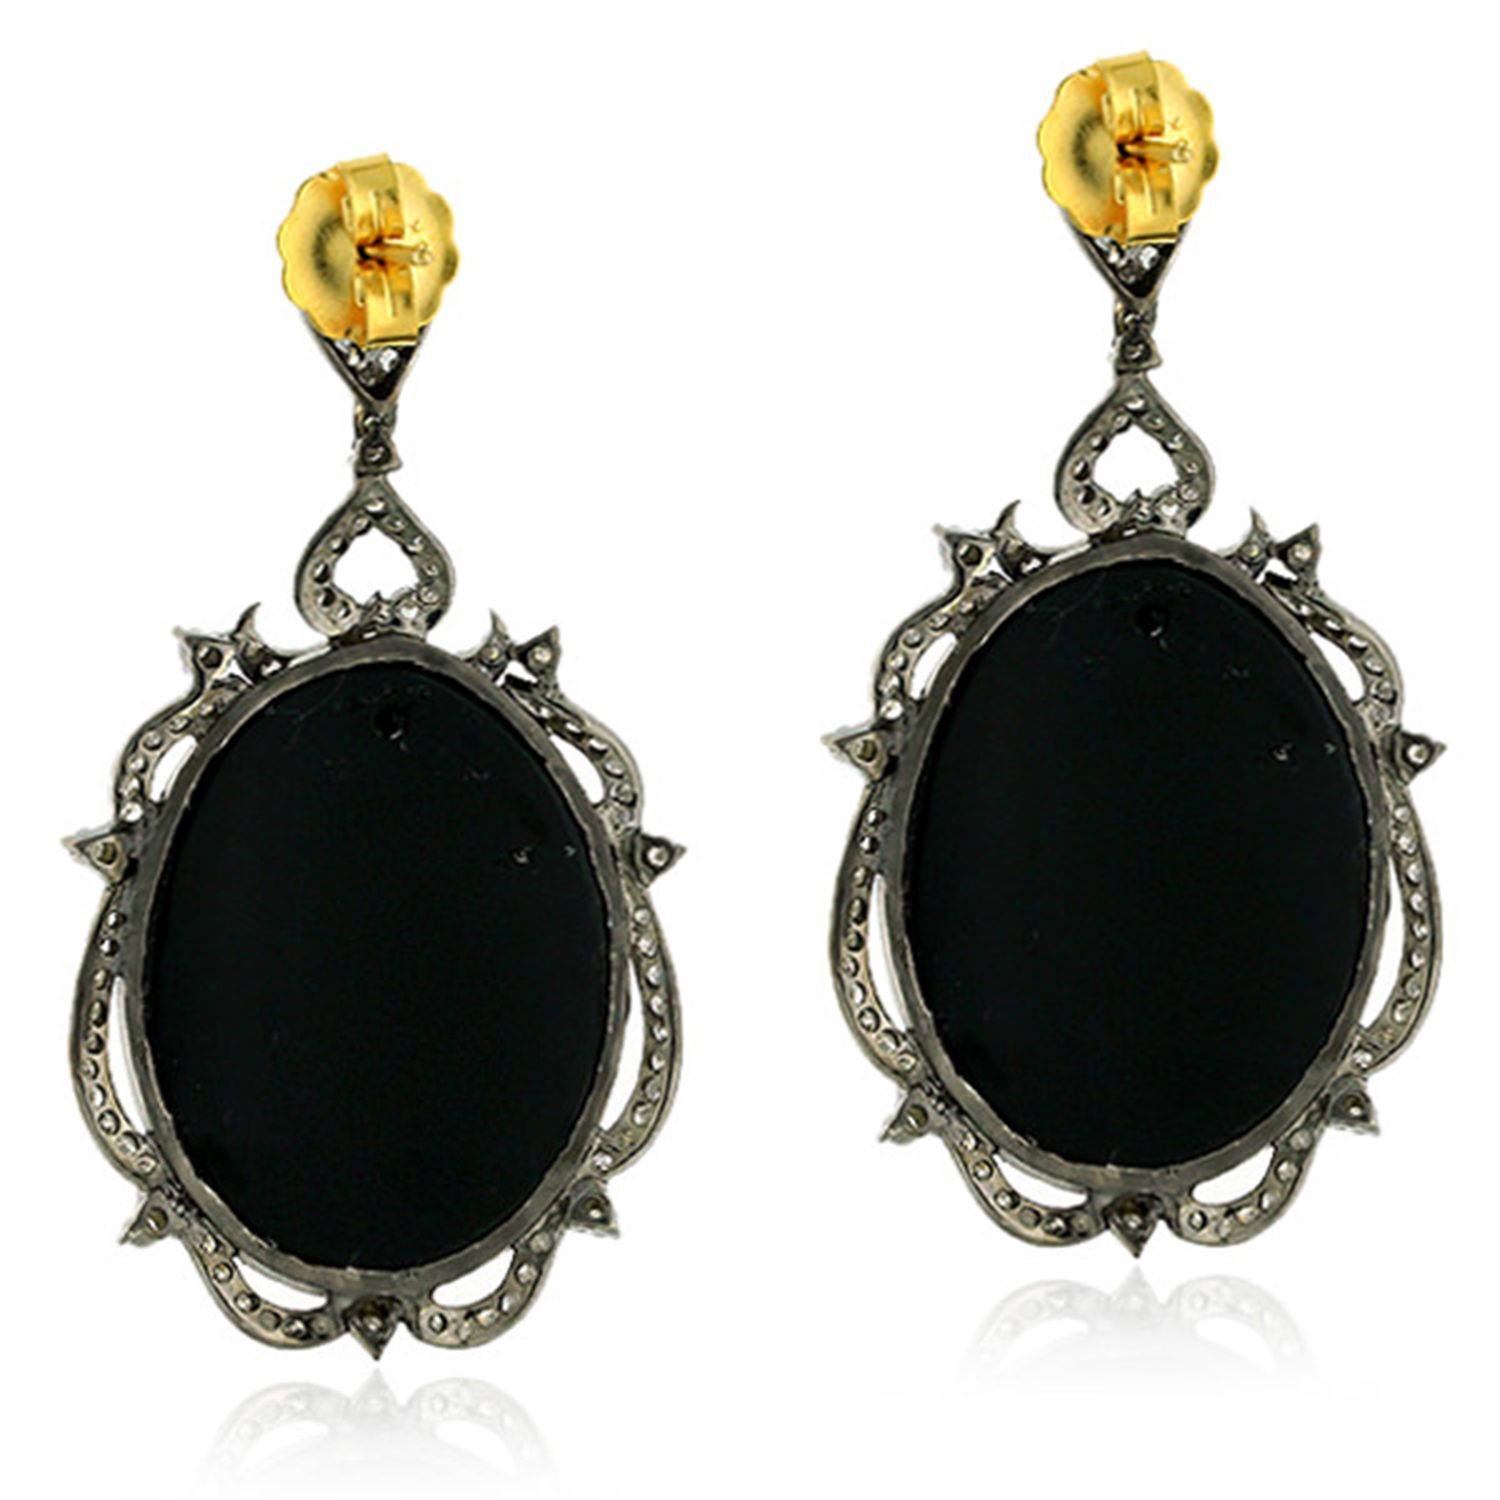 Stylish and evergreen, cameo earring with lovely designer pave motif with cameo face cut out of shell on onyx is just lovely.

18Kt: 1.31gms
Diamond: 3.02Ct
Silver: 8.98gms
CAMEOS: 47.9Ct